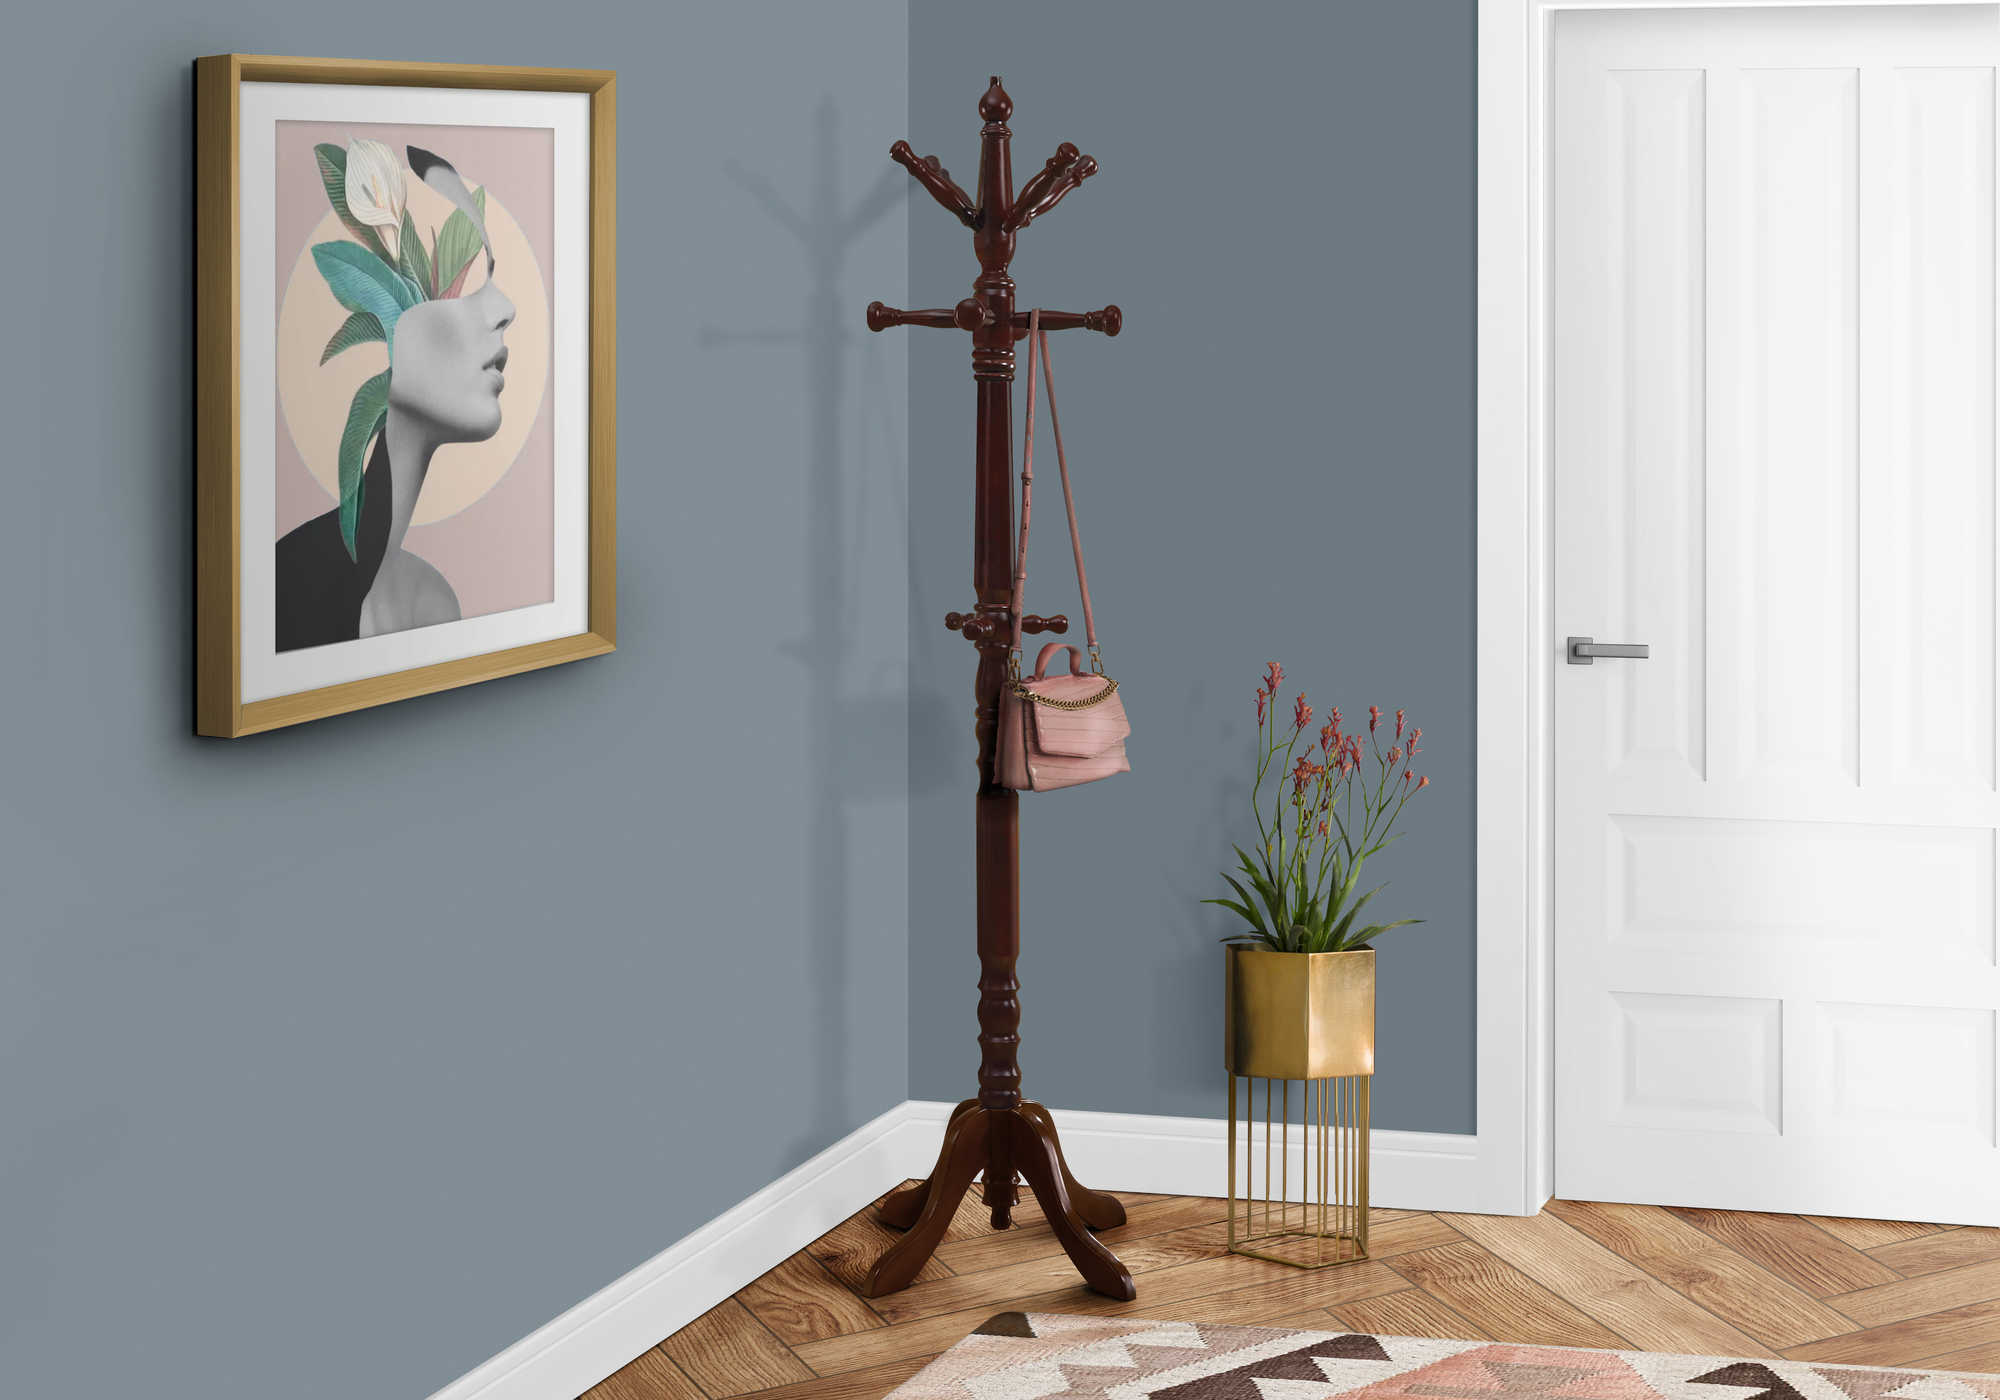 COAT RACK - 73"H / CHERRY WOOD TRADITIONAL STYLE